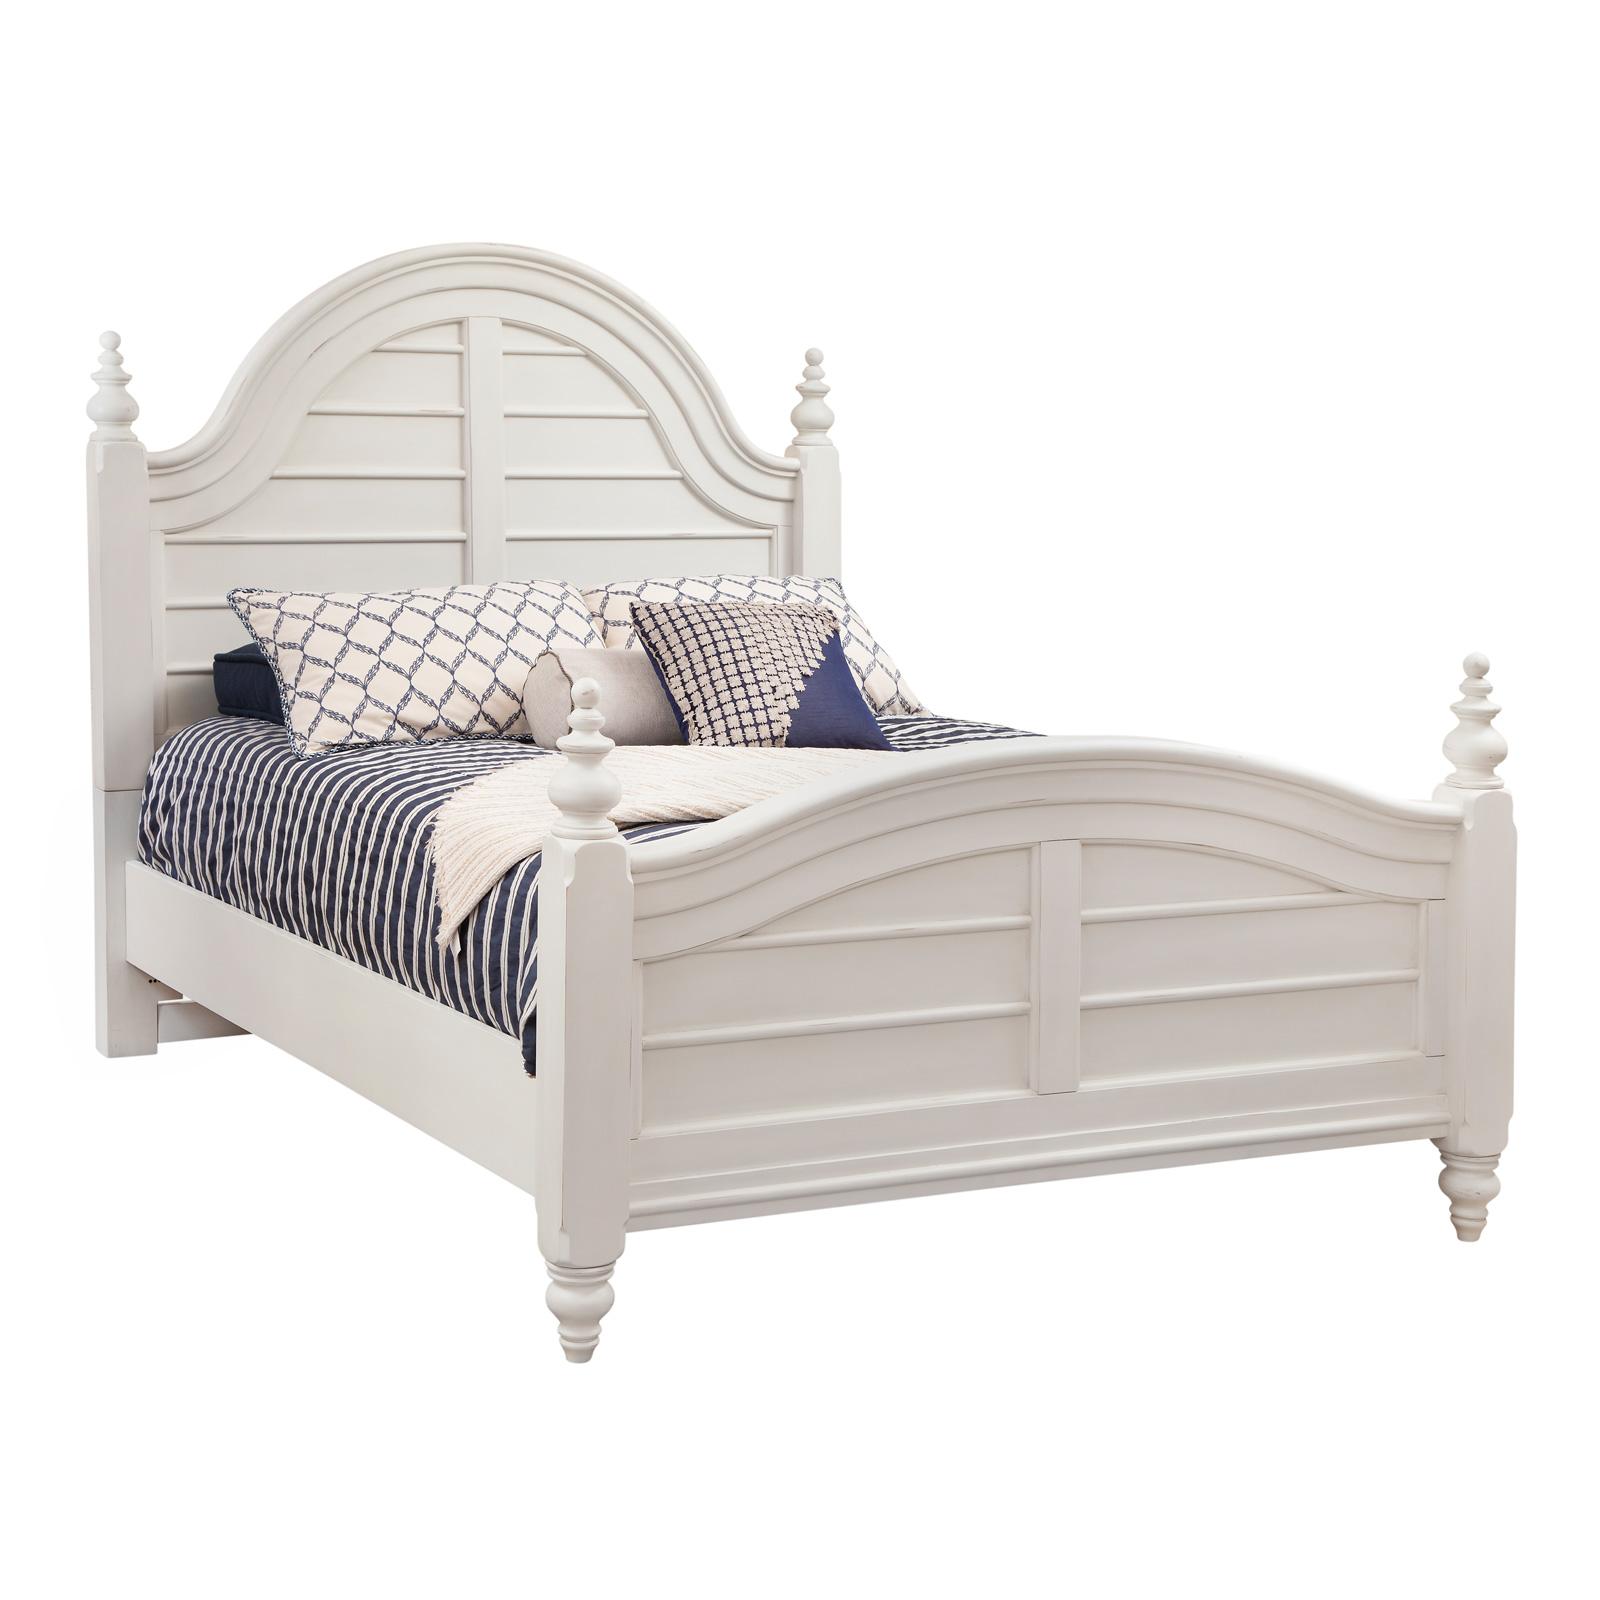 Youth, Traditional, Cottage Panel Bed Rodanthe 3910-66PNPN 3910-66PNPN in White 